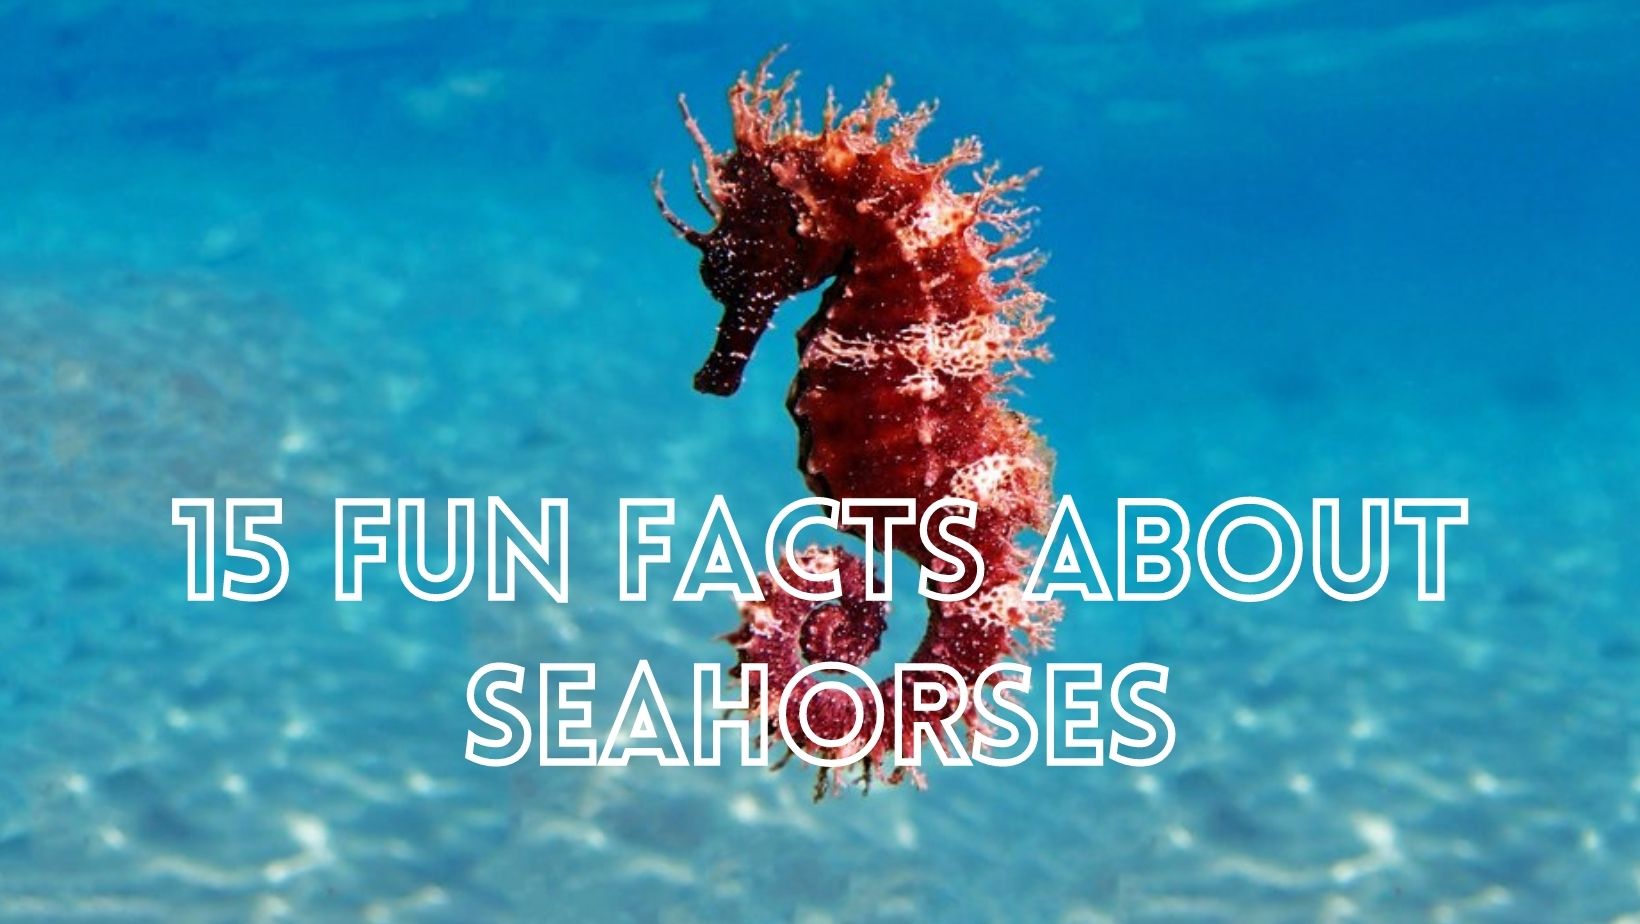 Fun facts about seahorses